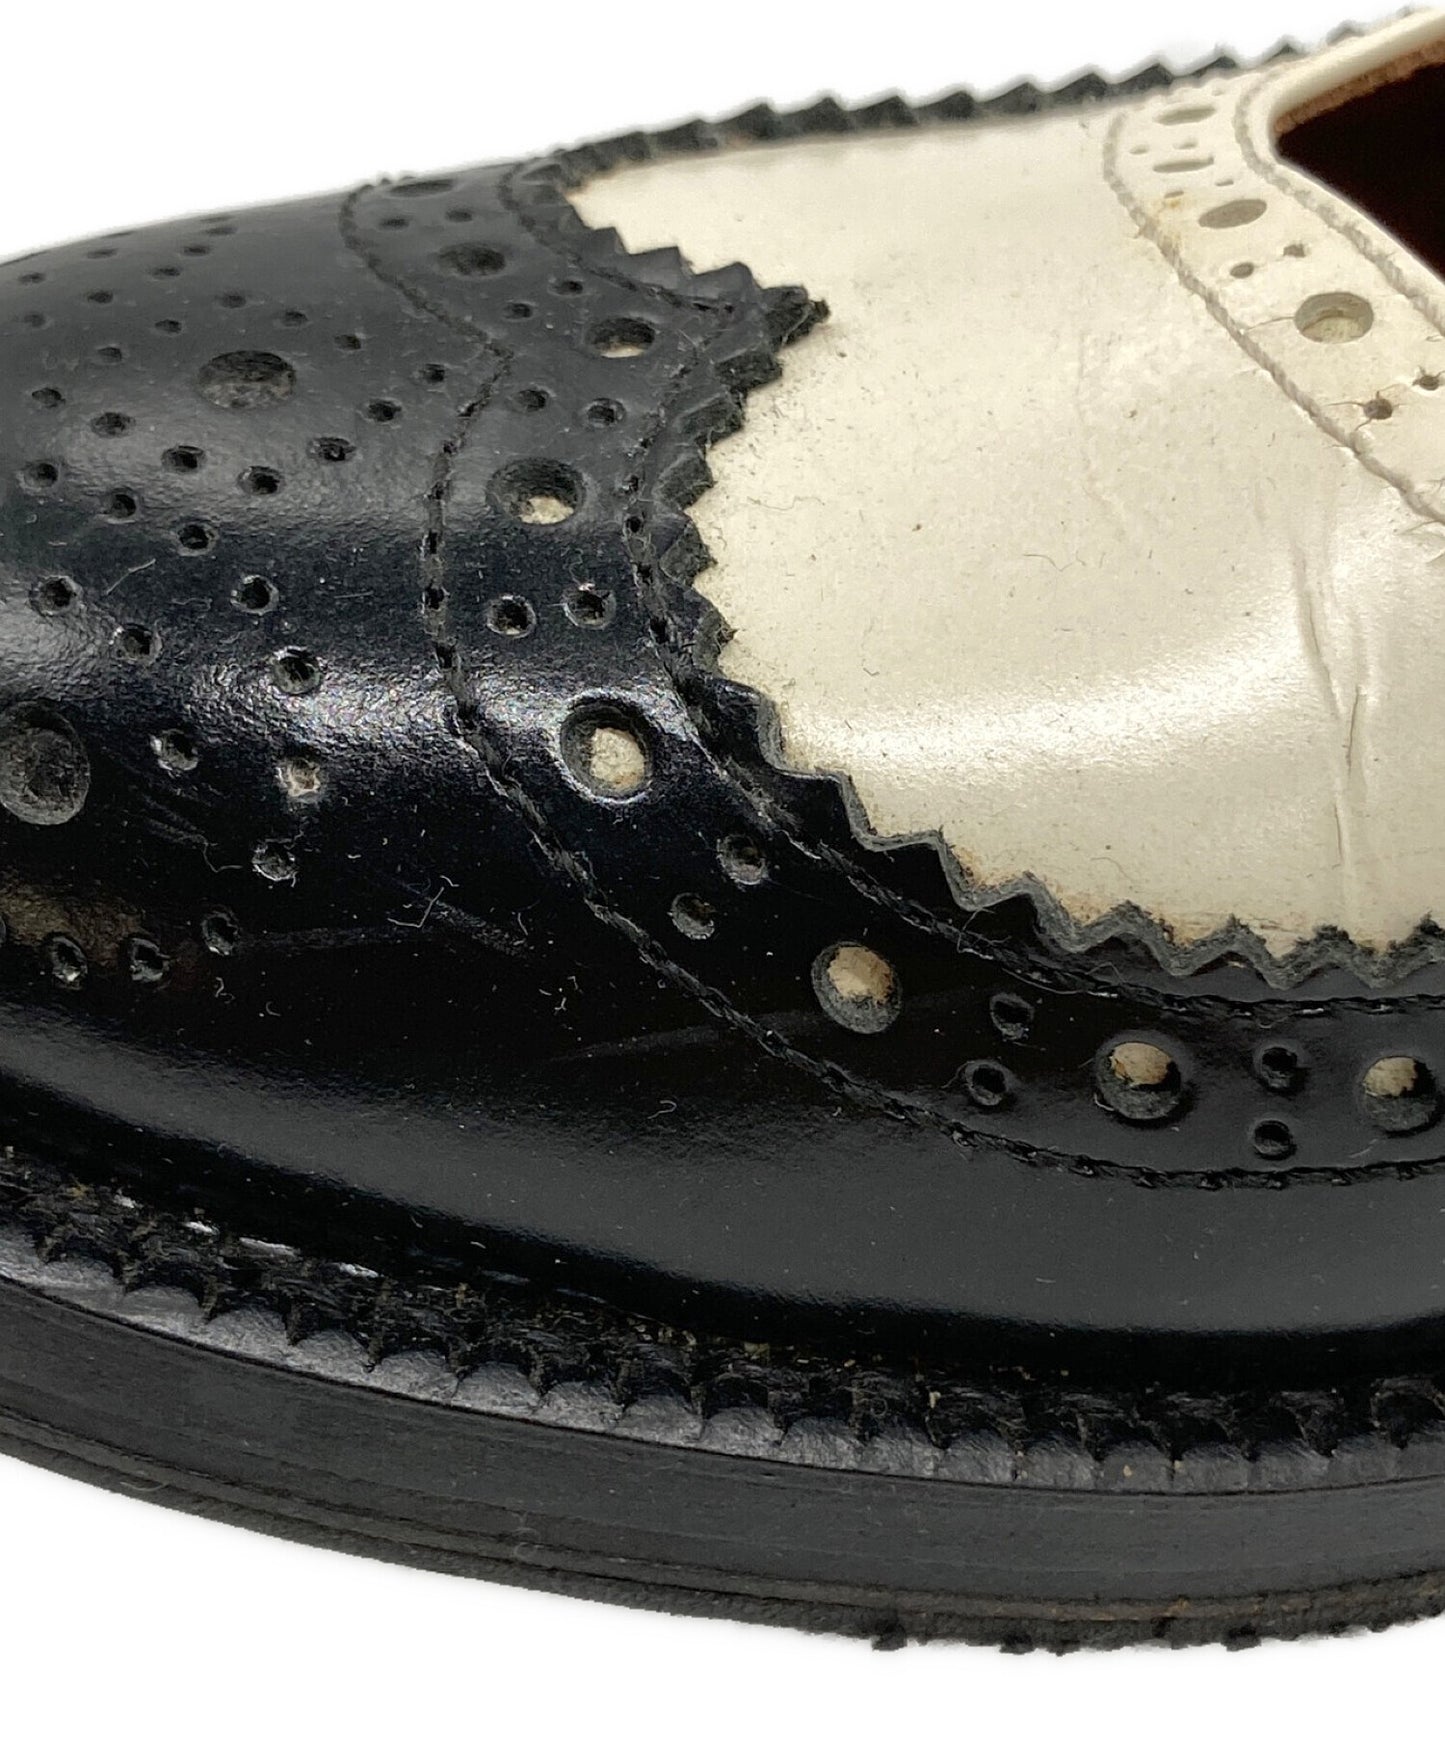 [Pre-owned] JUNYA WATANABE COMME des GARCONS Wingtip mary jane shoes